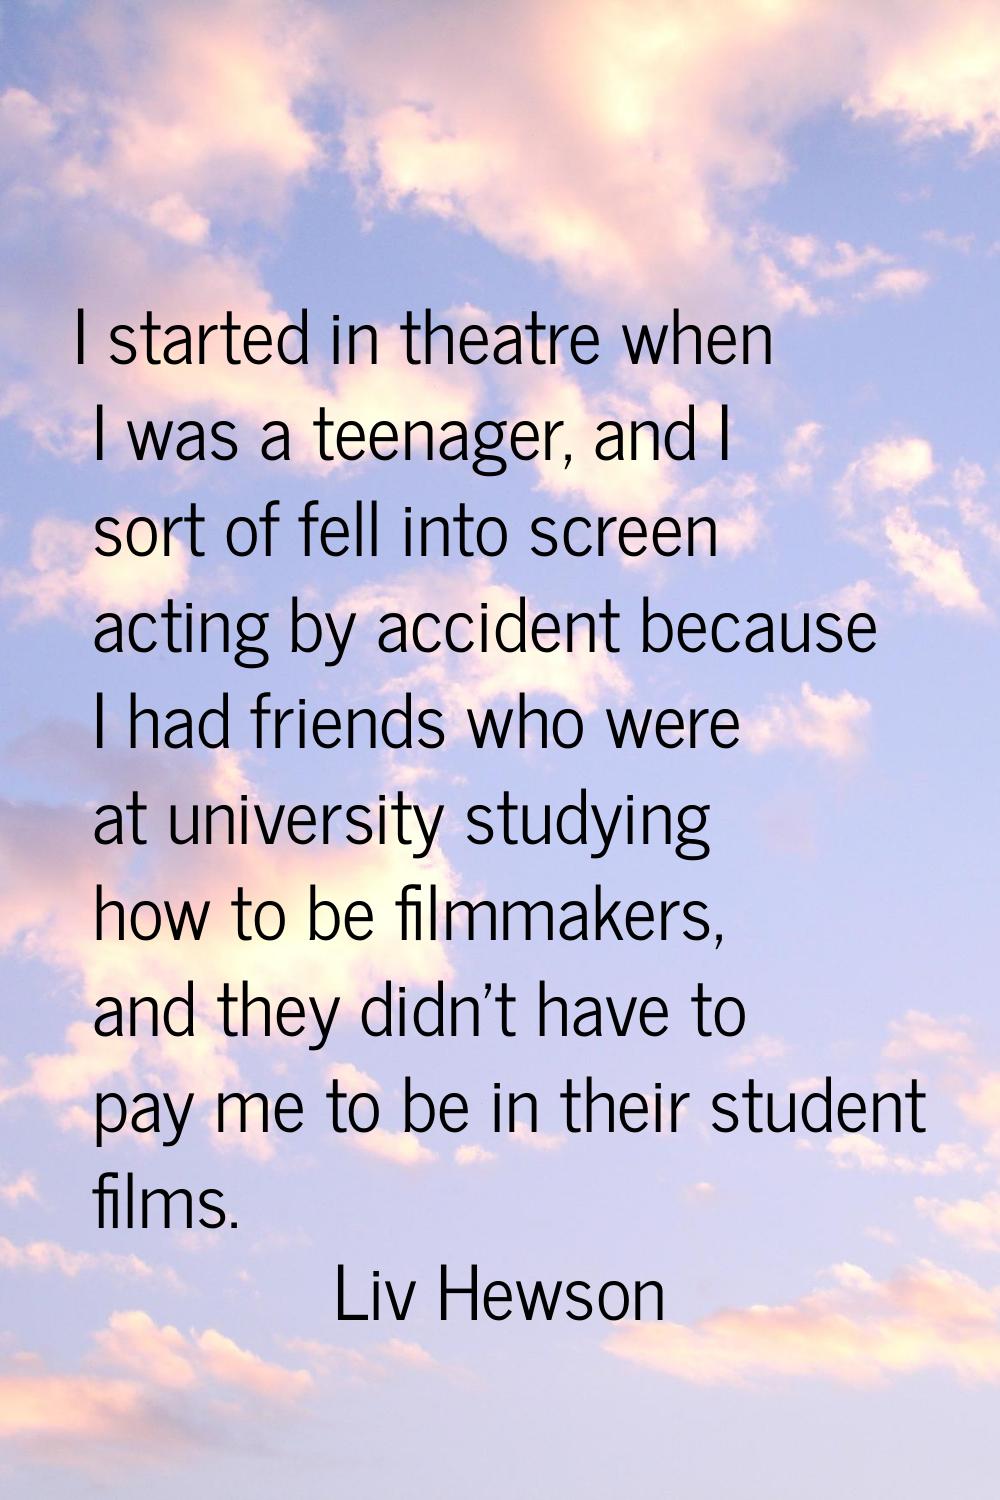 I started in theatre when I was a teenager, and I sort of fell into screen acting by accident becau